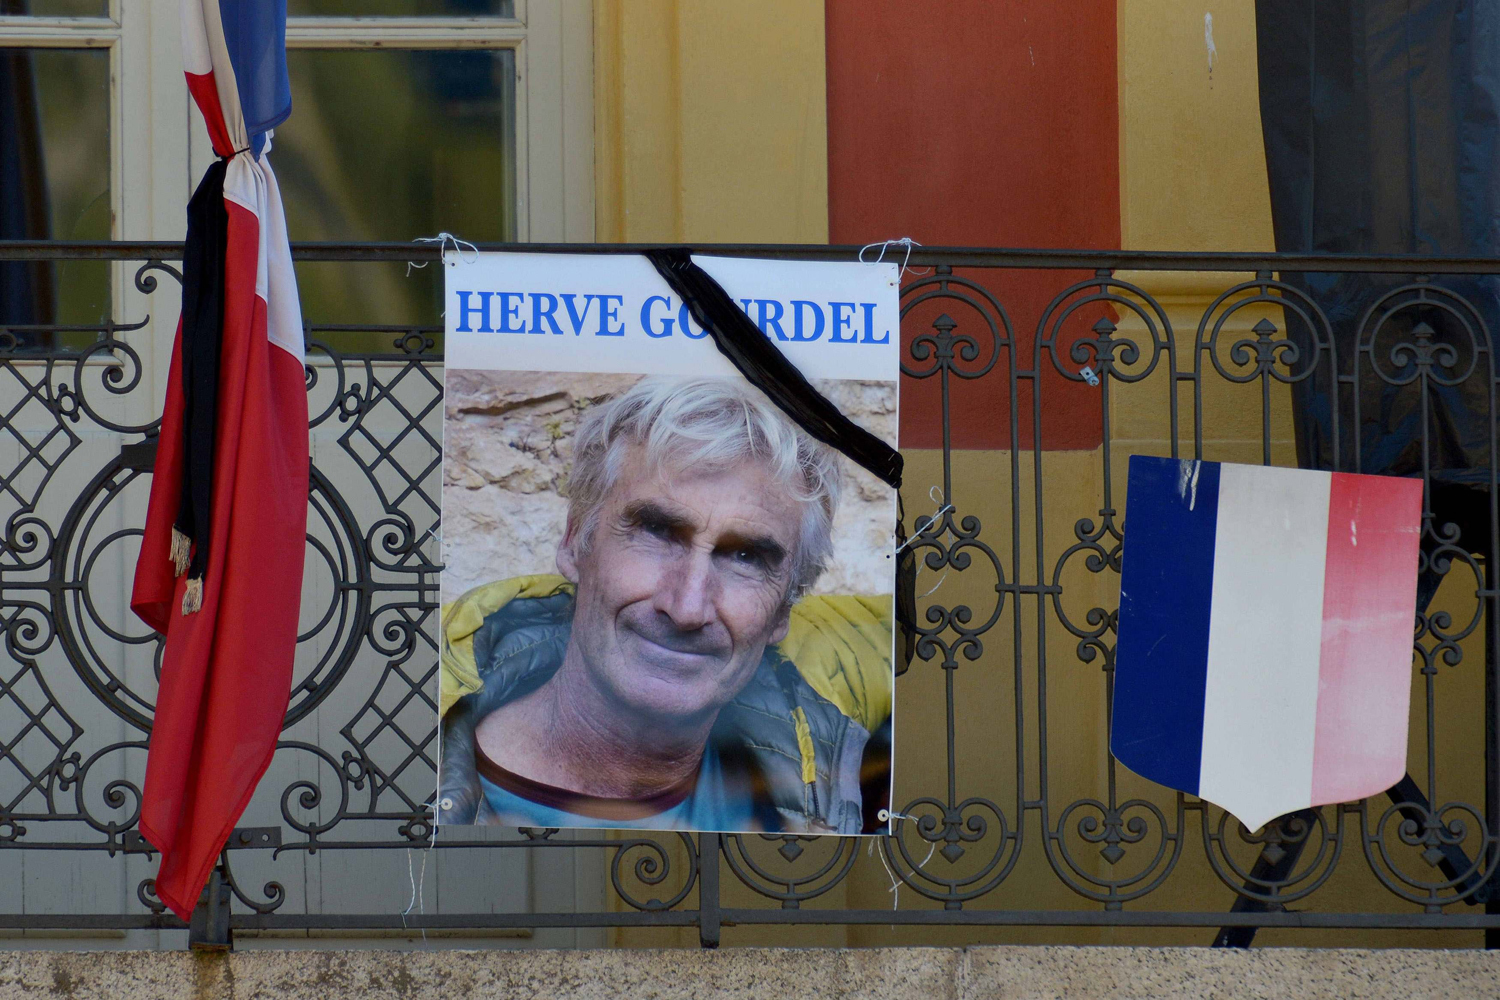 A portrait of Herve Gourdel hangs outside the town hall in Saint-Martin-Vesubie, France, Sept. 25, 2014. (Patrice Masante—Reuters)